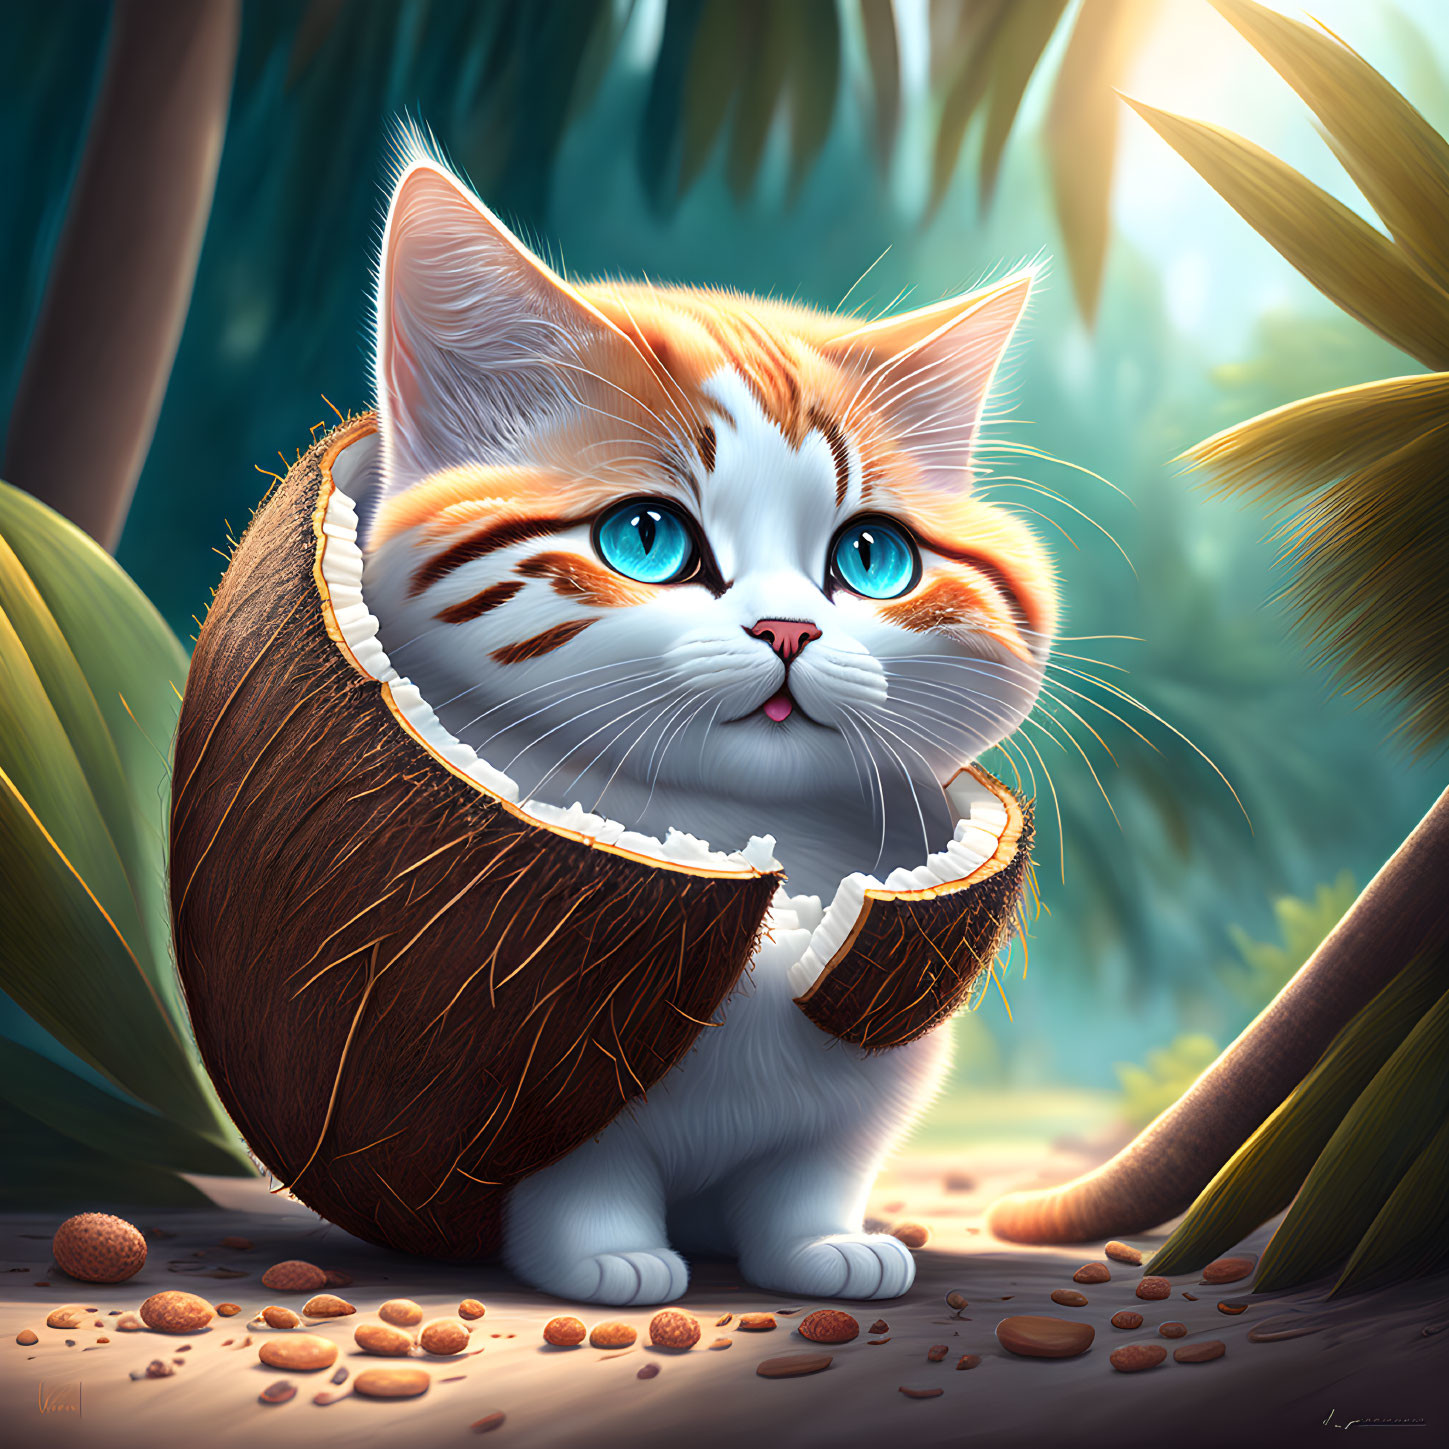 Illustrated cat with blue eyes in coconut shell amid tropical foliage